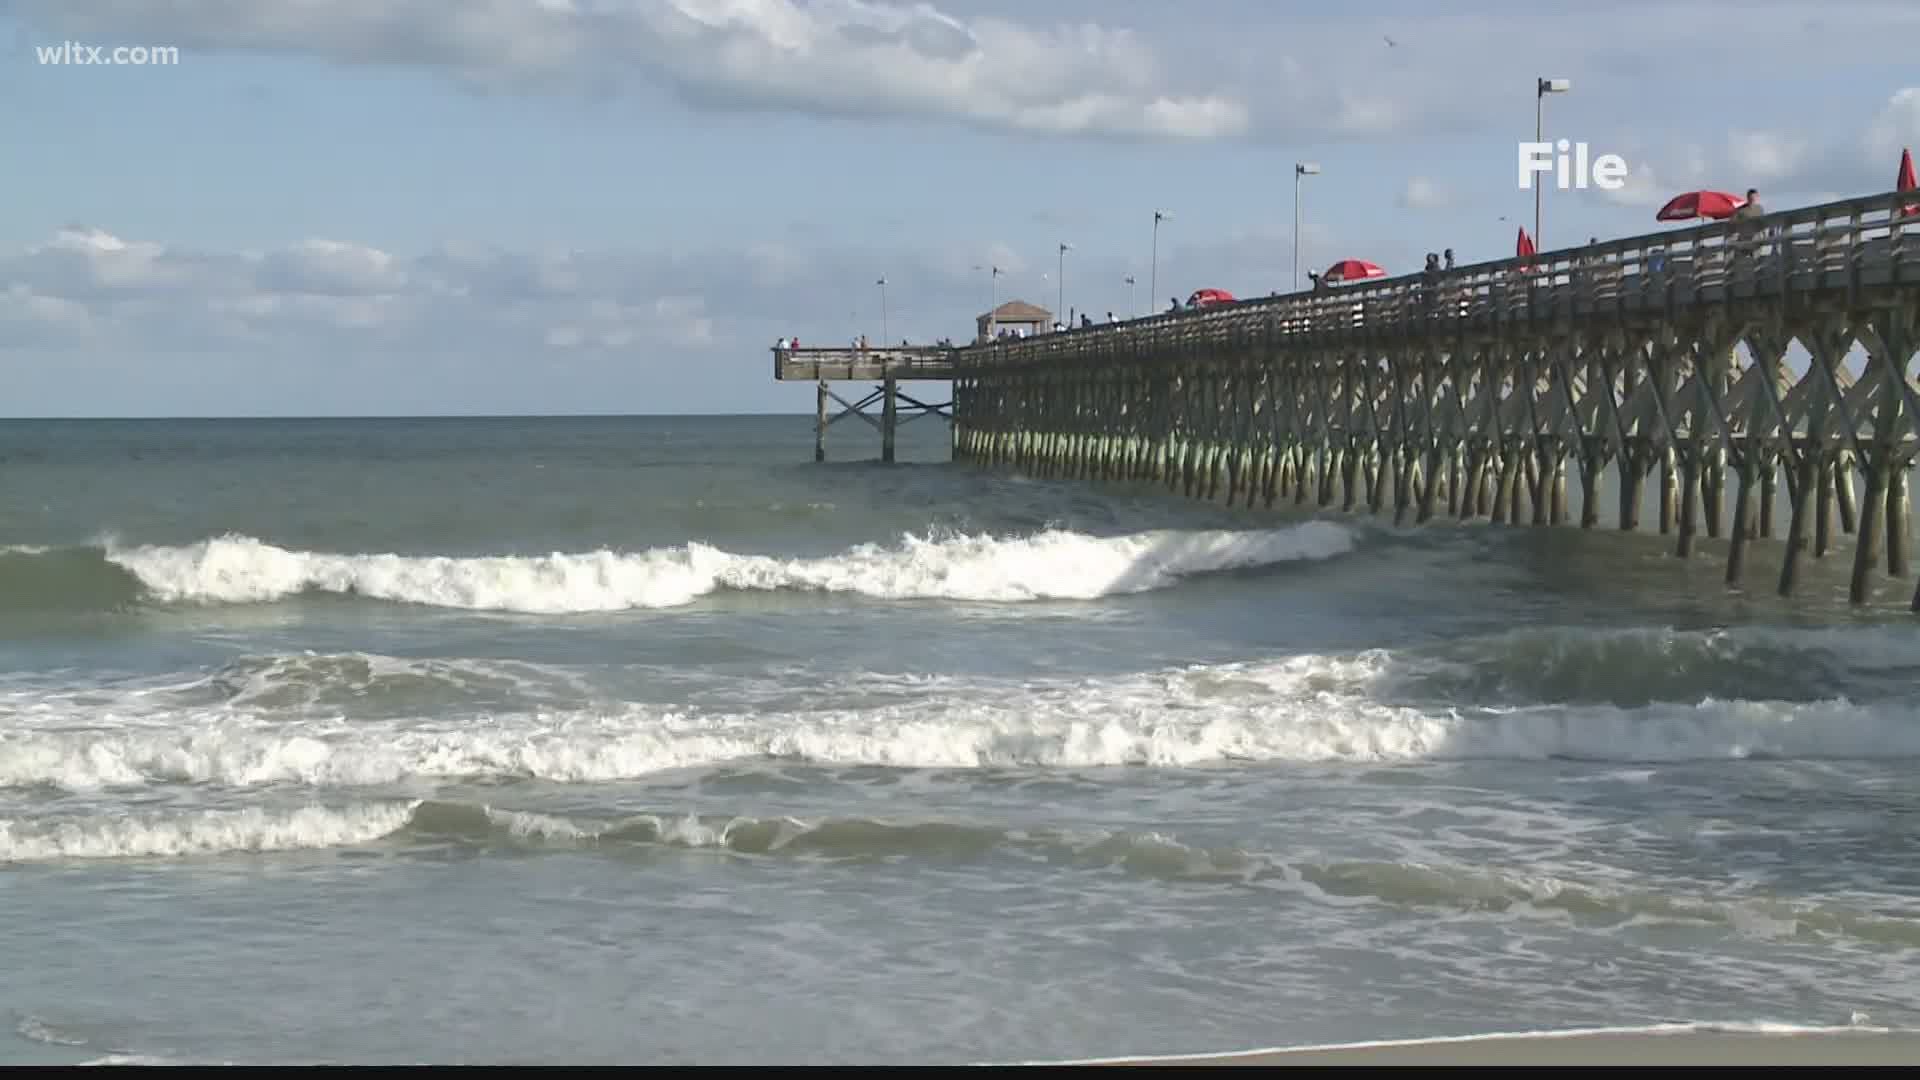 North Myrtle Beach mayor Mayor Marilyn Hatley says the tourism industry has been one of the hardest hit during the pandemic.